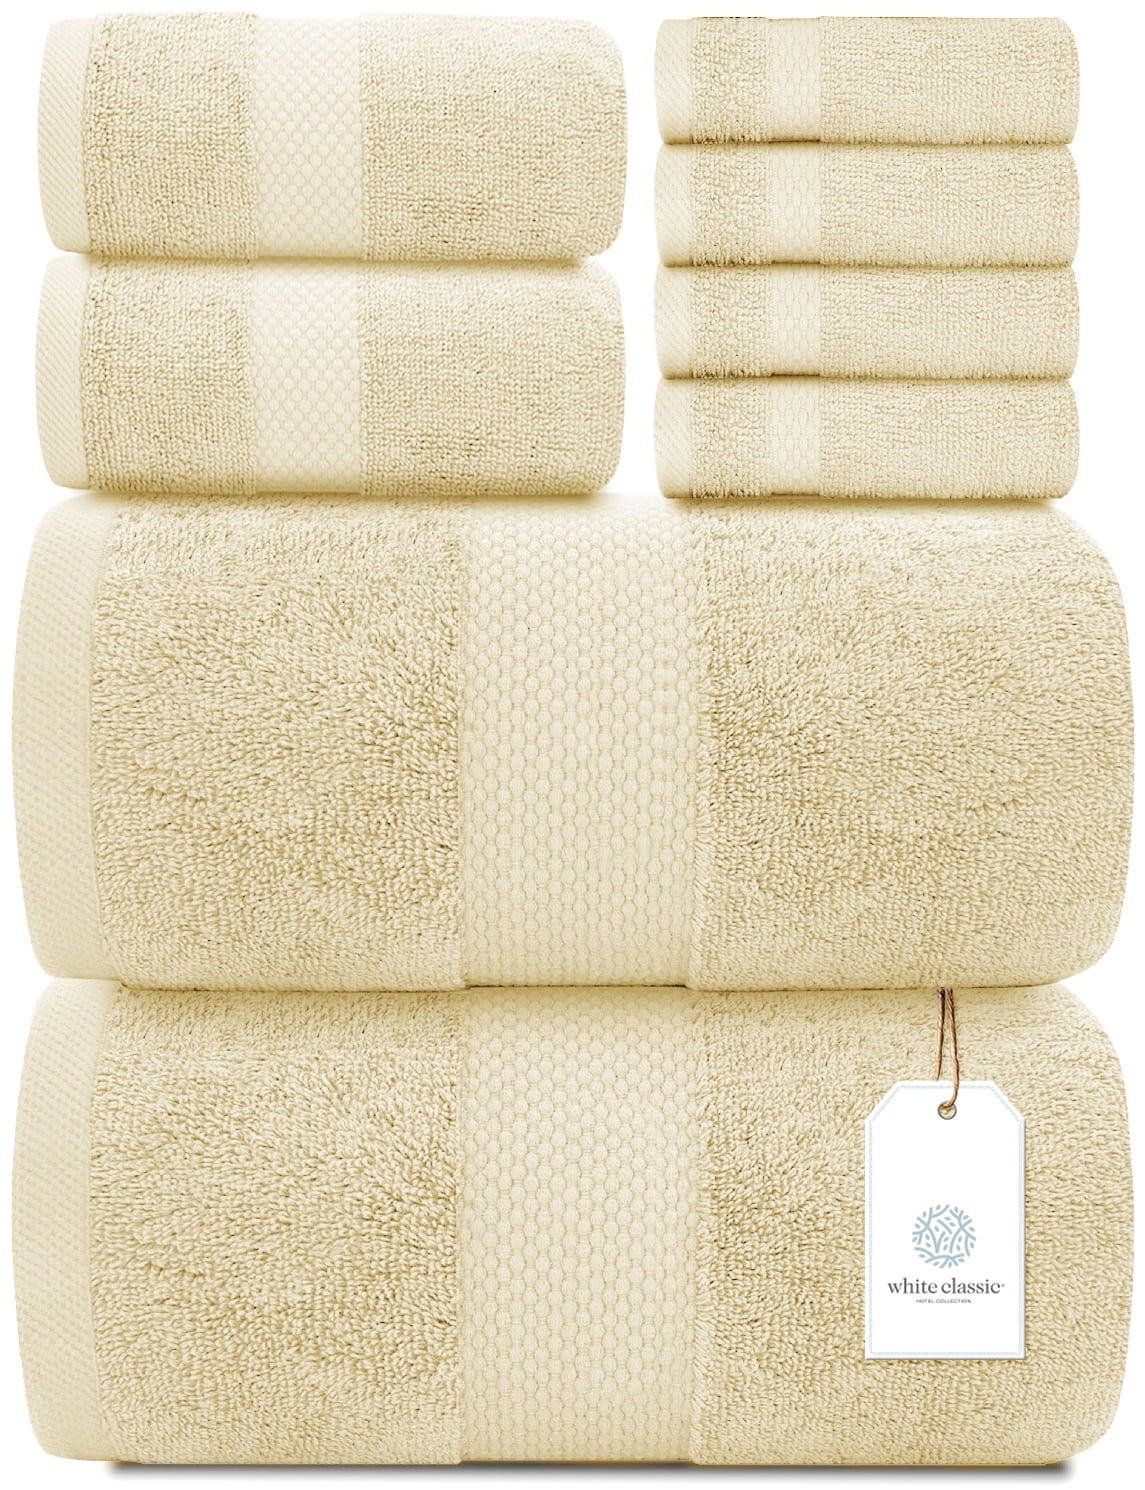 LUXURY 07 Pieces Towels Set, 100% Natural Cotton, Premium Hotel & Spa  Quality, Thick, Soft, Highly Absorbent (2 Hand Towel, 2 Bath Towel, 2 Face  Cloth + Bath Mat) - Elegant